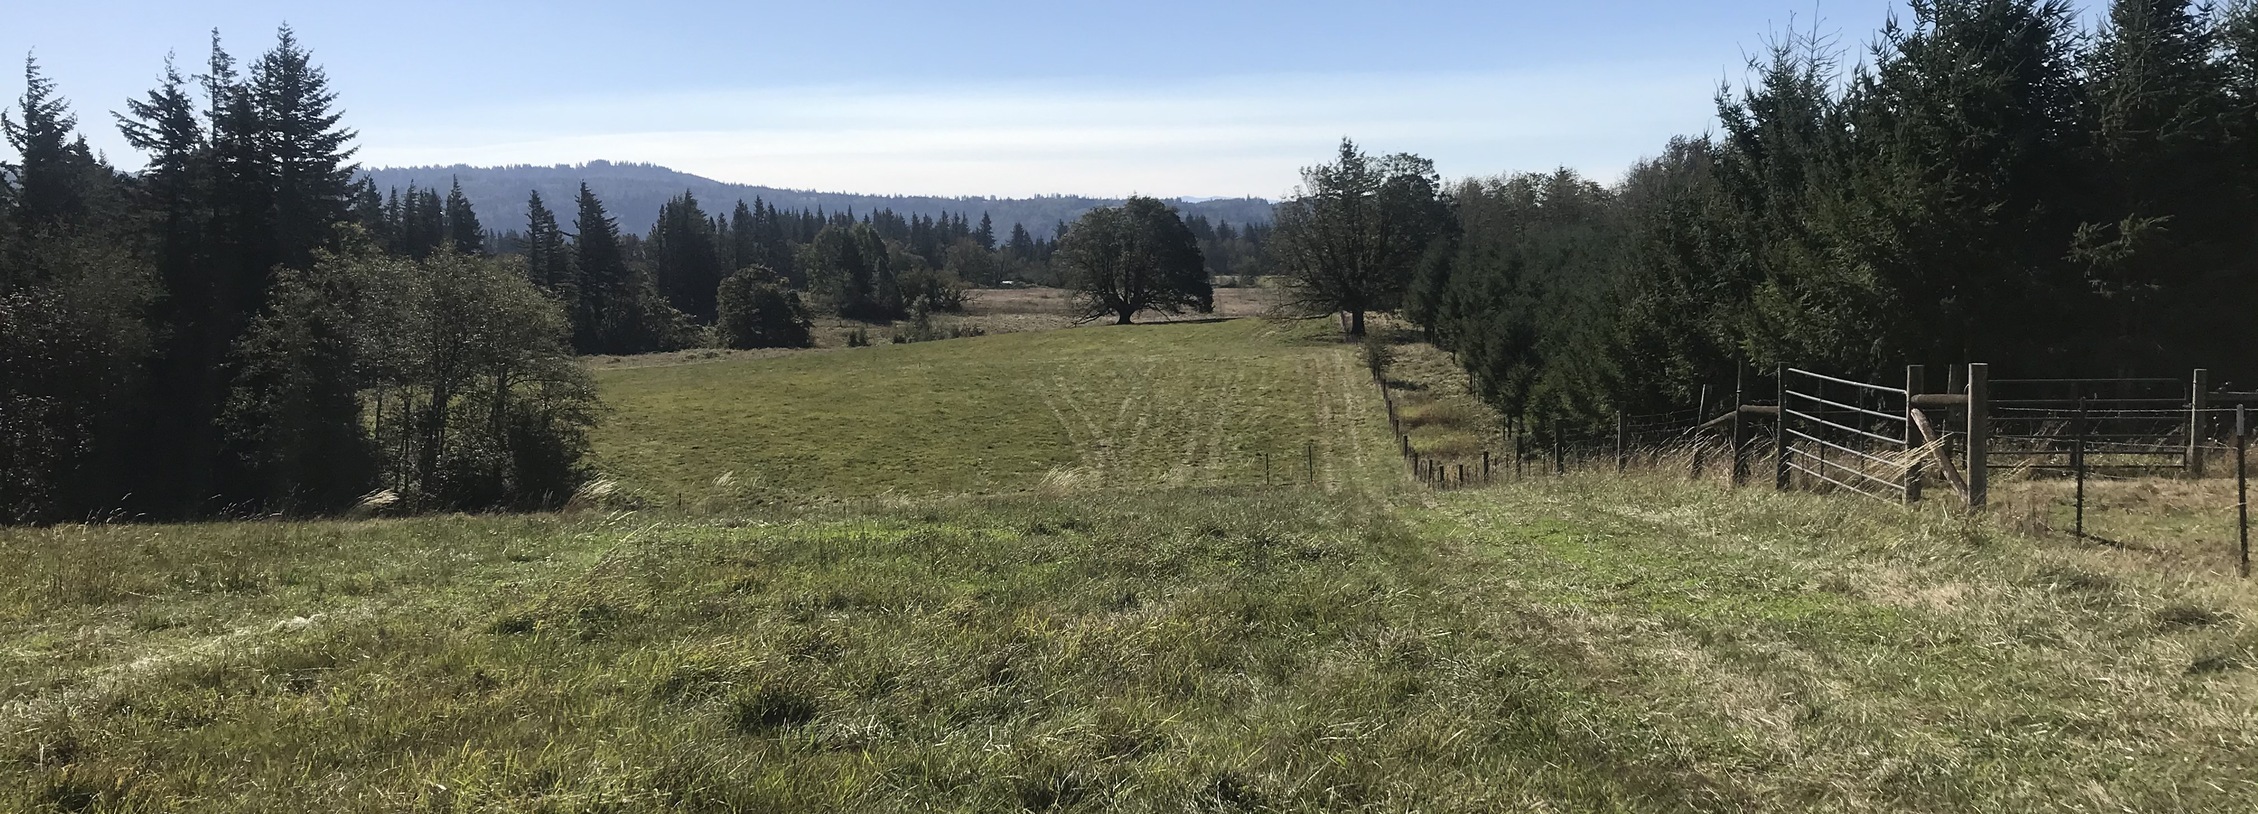 Friends Succeeds in Protecting Gorge Farmland Through Litigation